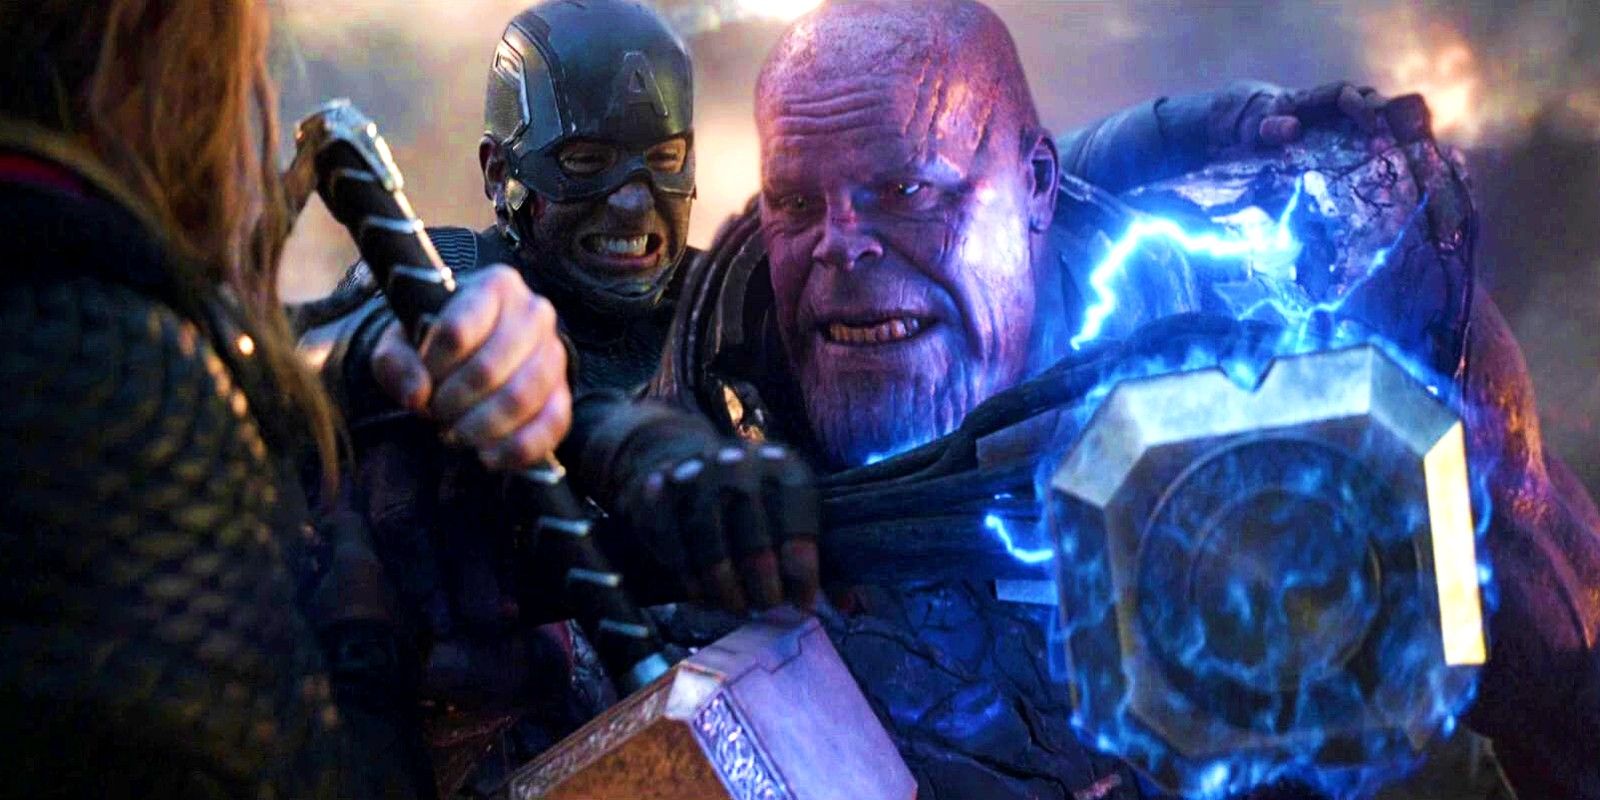 Captain America and Thor Struggle With Thanos in Avengers Endgame